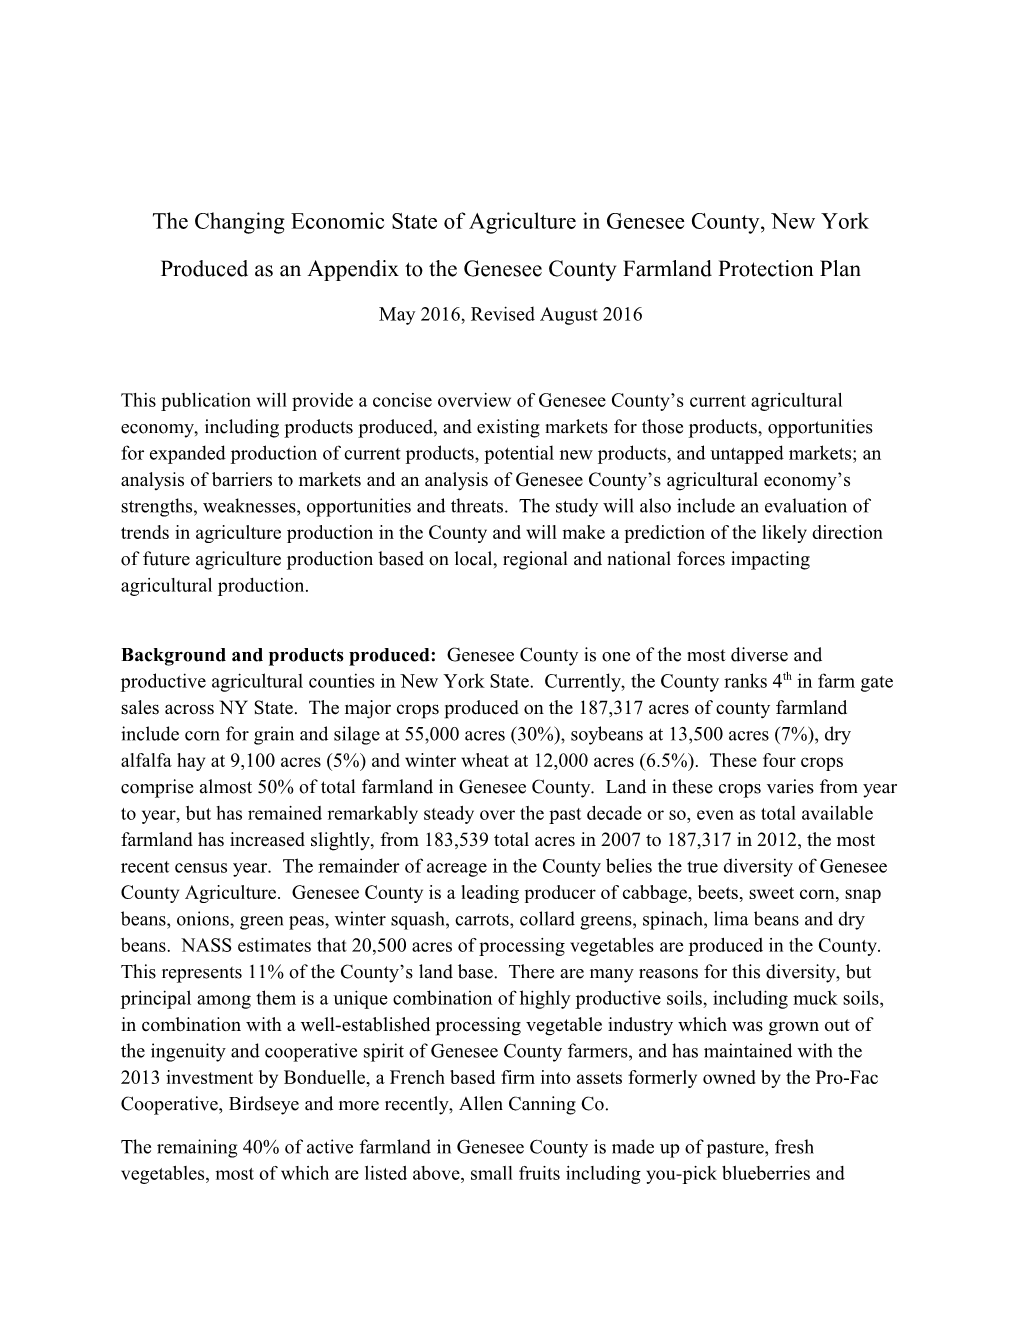 The Changing Economic State of Agriculture in Genesee County, New York